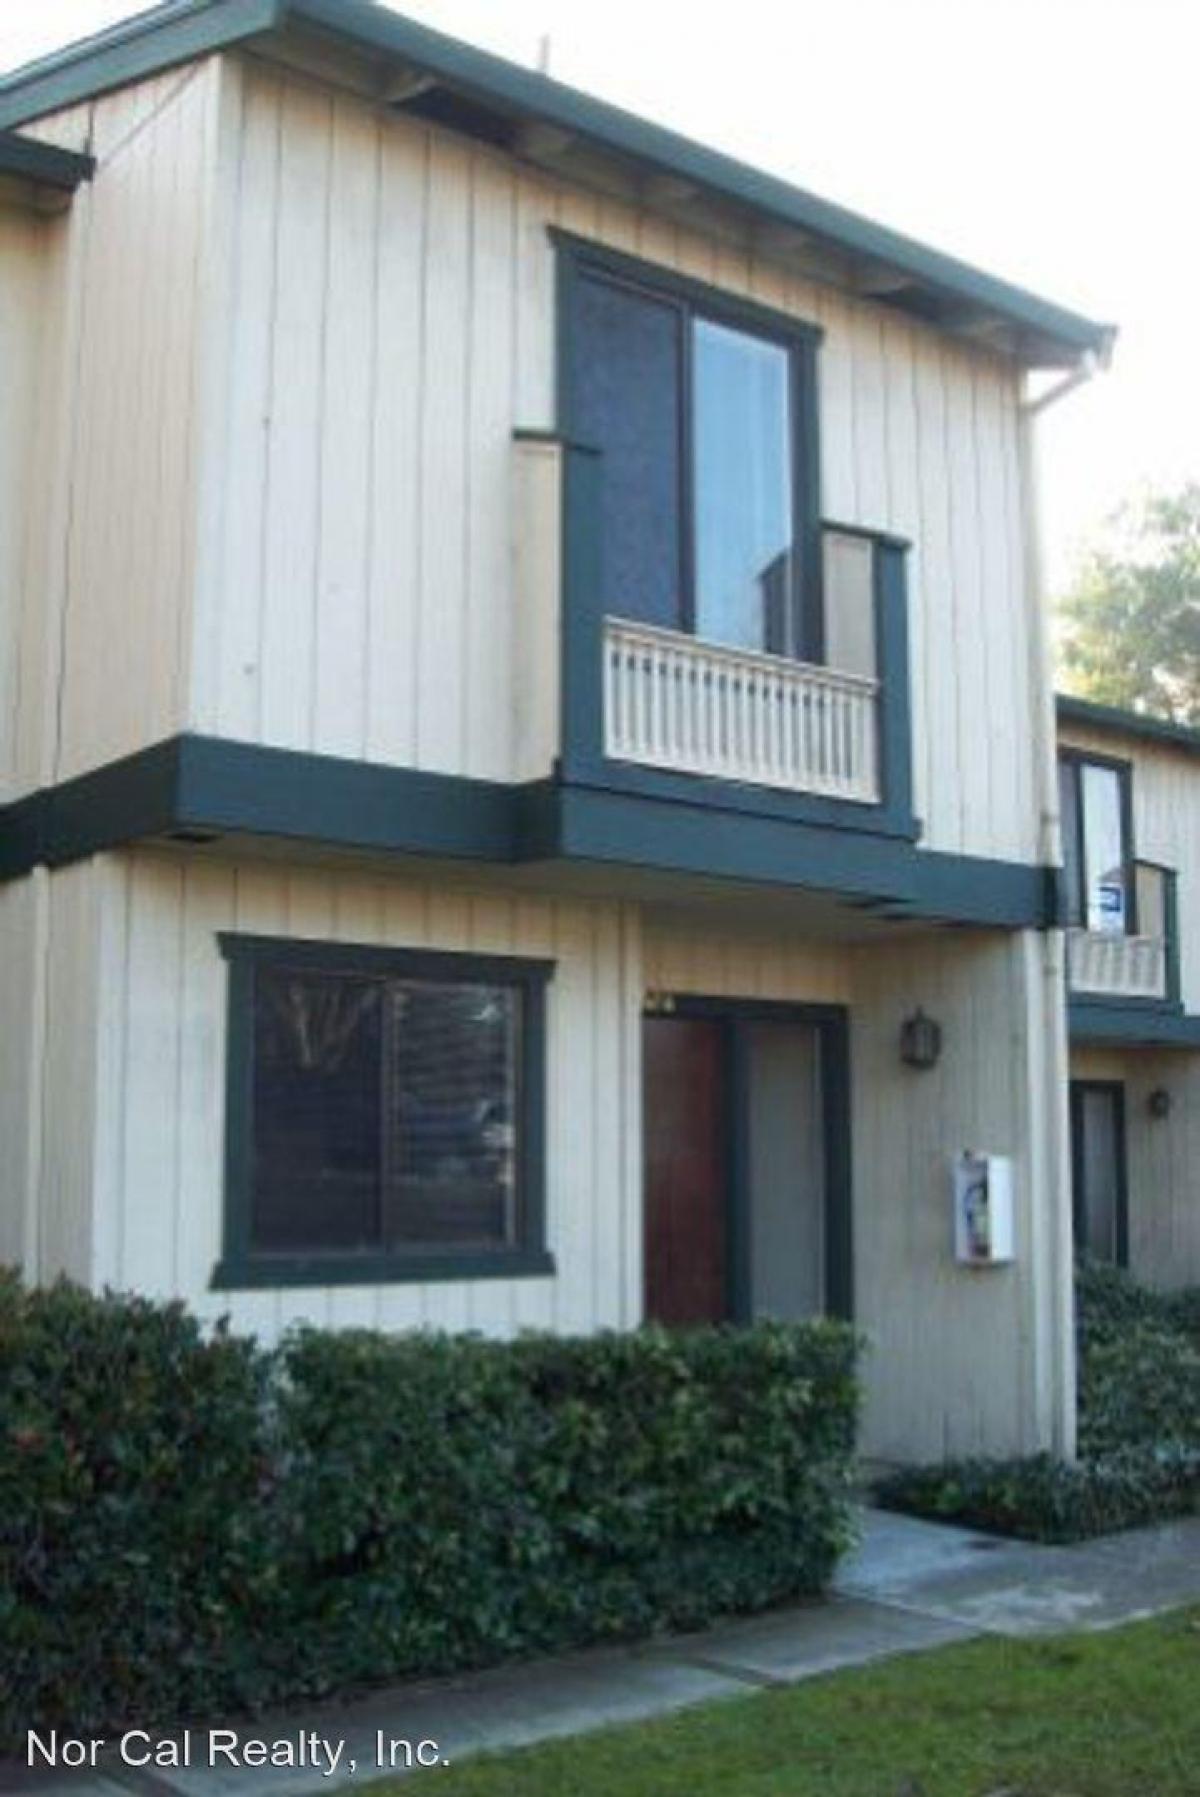 Picture of Home For Rent in Union City, California, United States